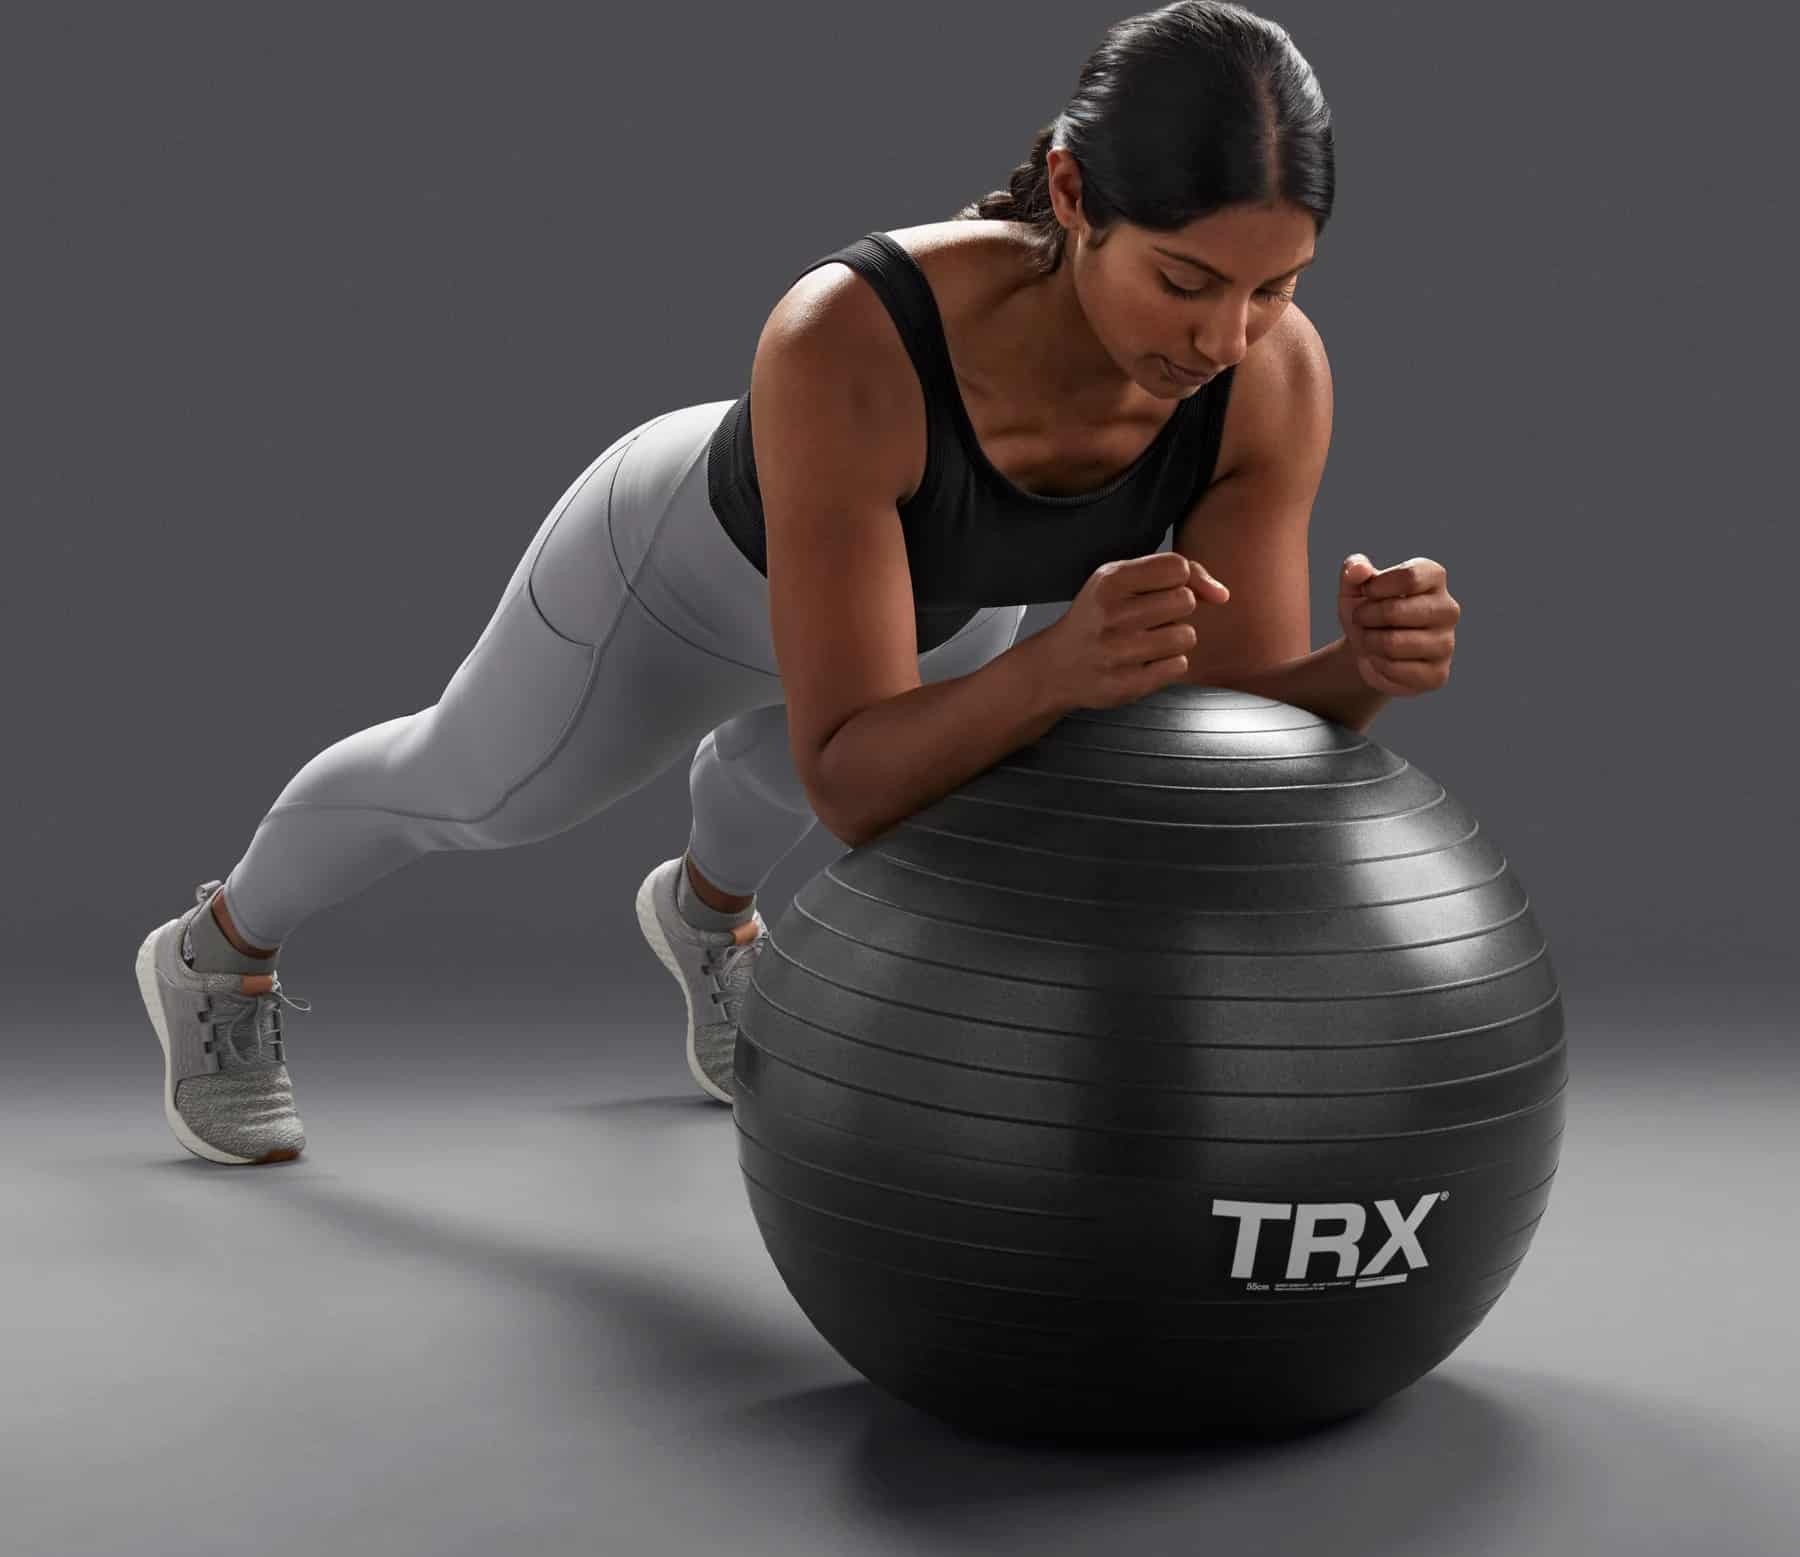 TRX Stability Ball with an athlete 2